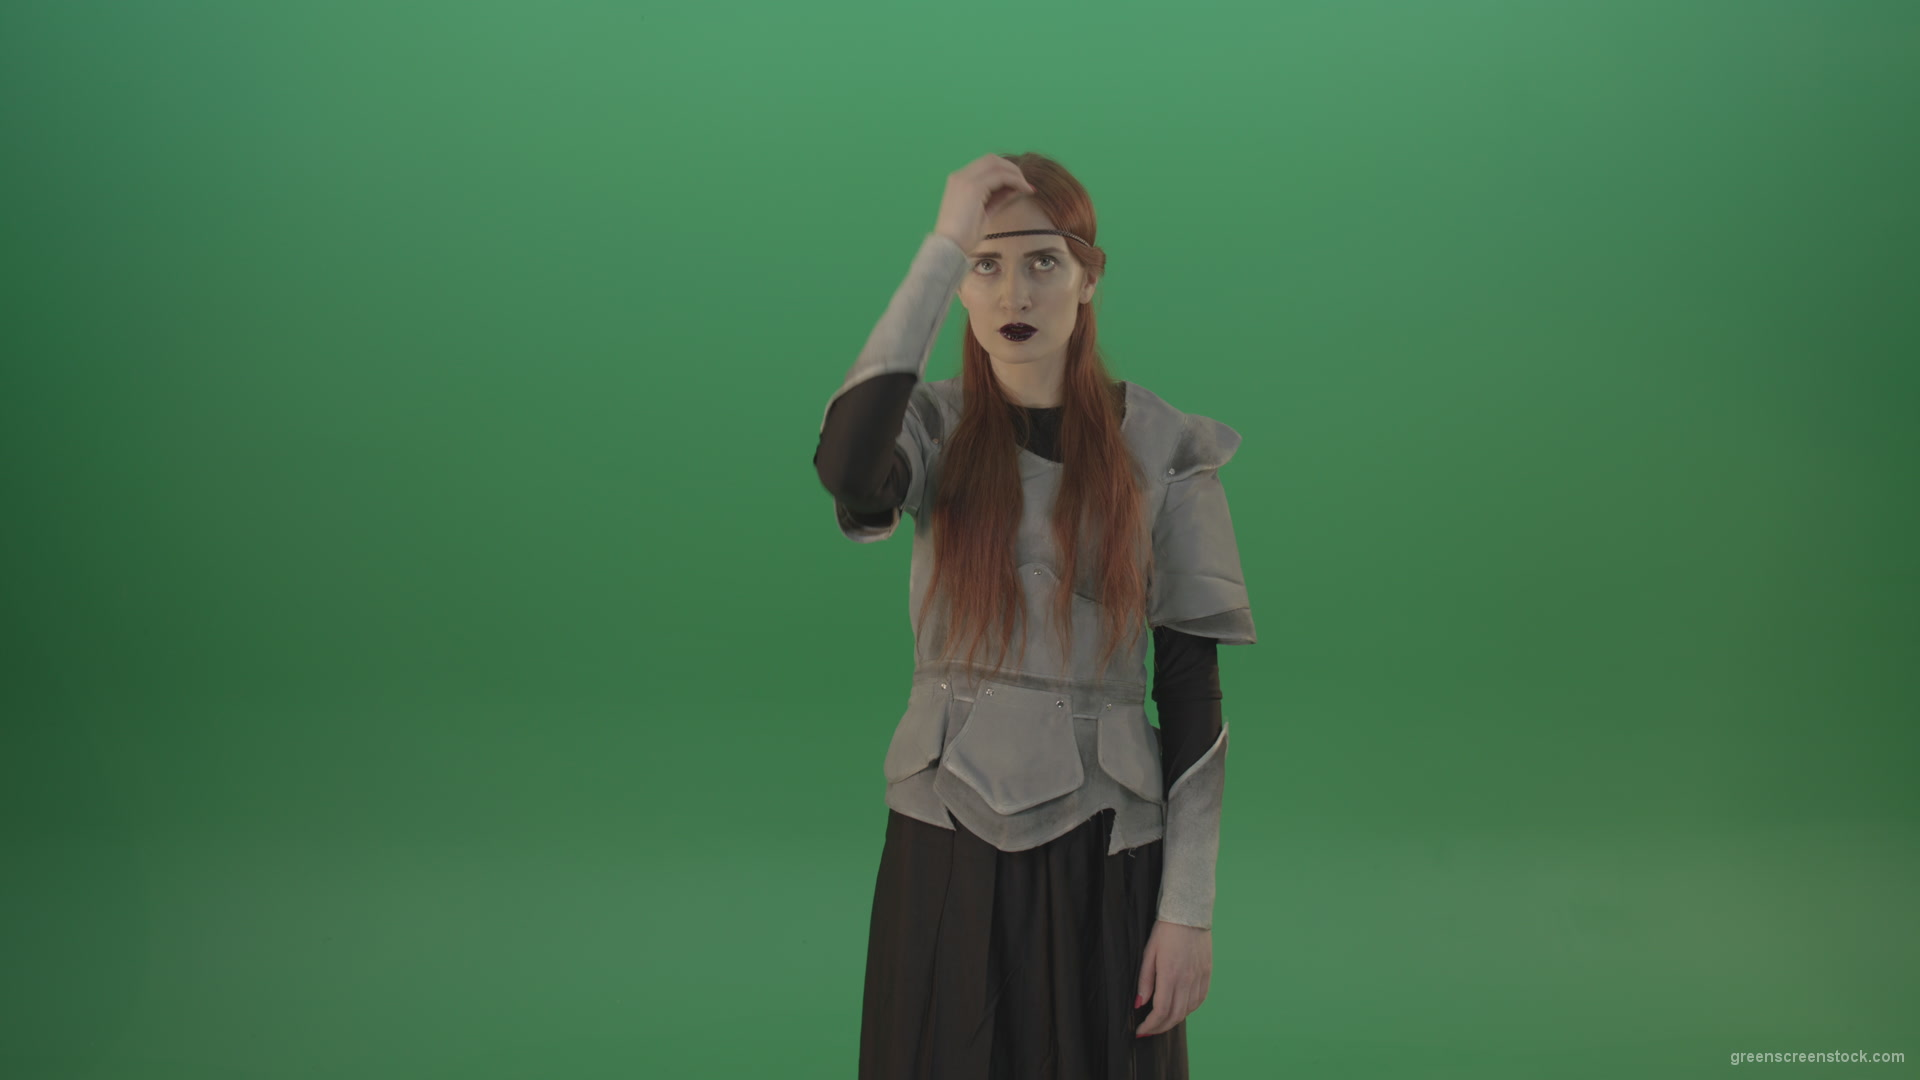 vj video background Actress-red-hair-girl-in-a-medieval-war-dress-crosses-praying-to-God-on-green-screen_003